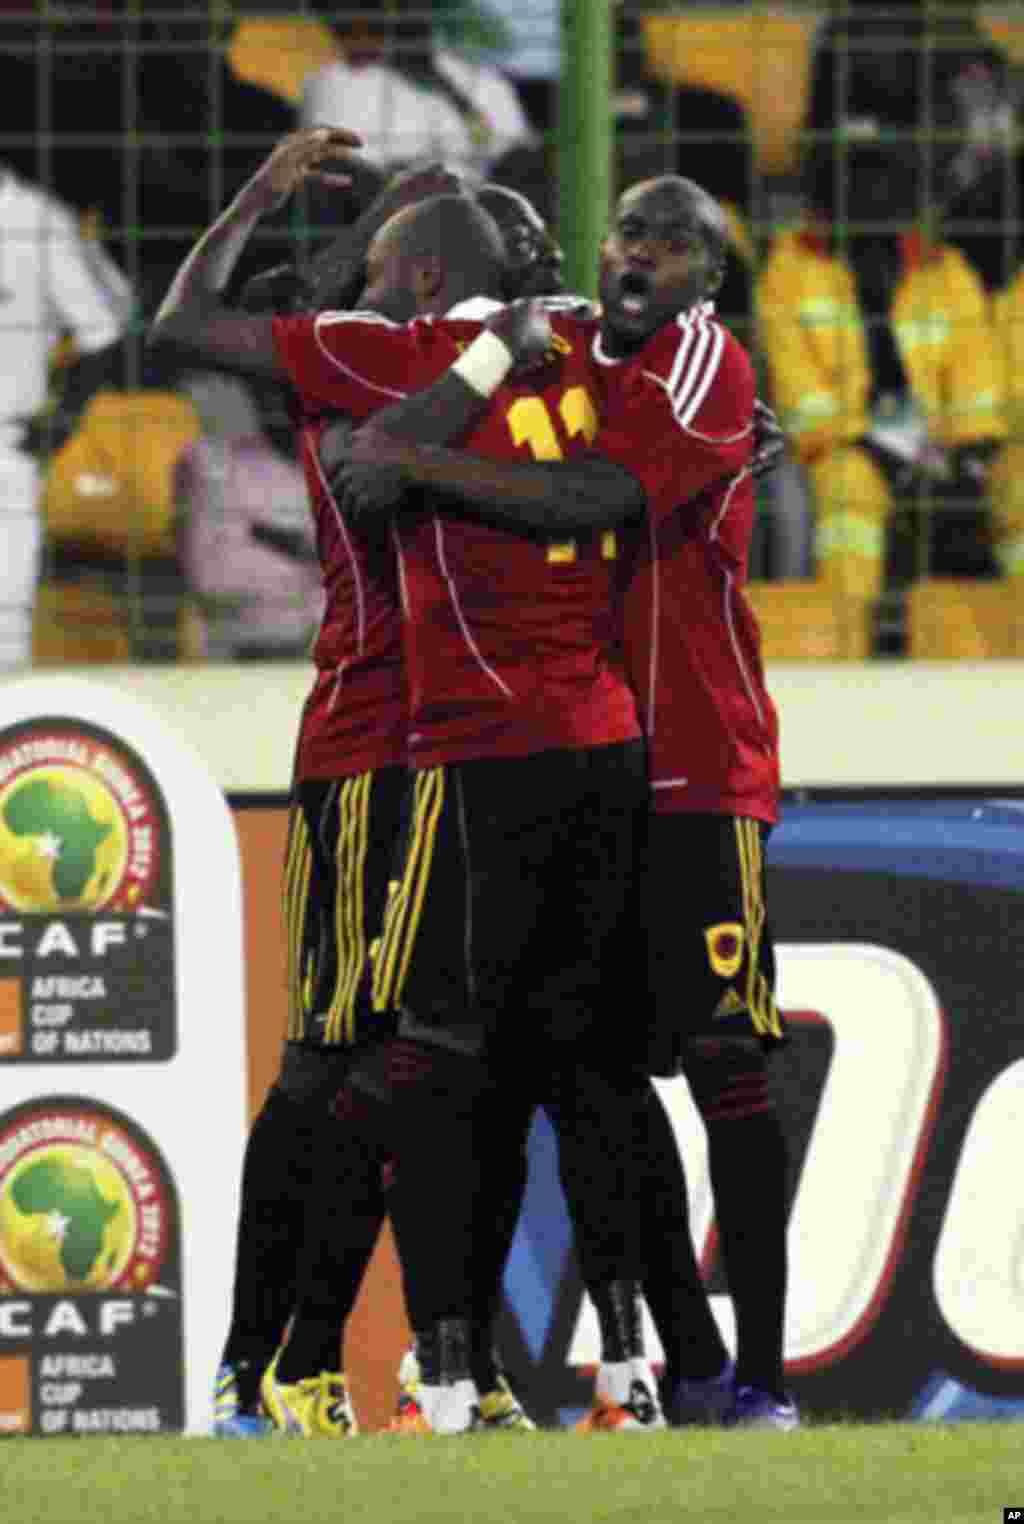 Angola players celebrate after scoring against Burkina Faso during their African Nations Cup soccer match at Estadio de Malabo "Malabo Stadium", in Malabo January 22, 2012. REUTERS/Luc Gnago.